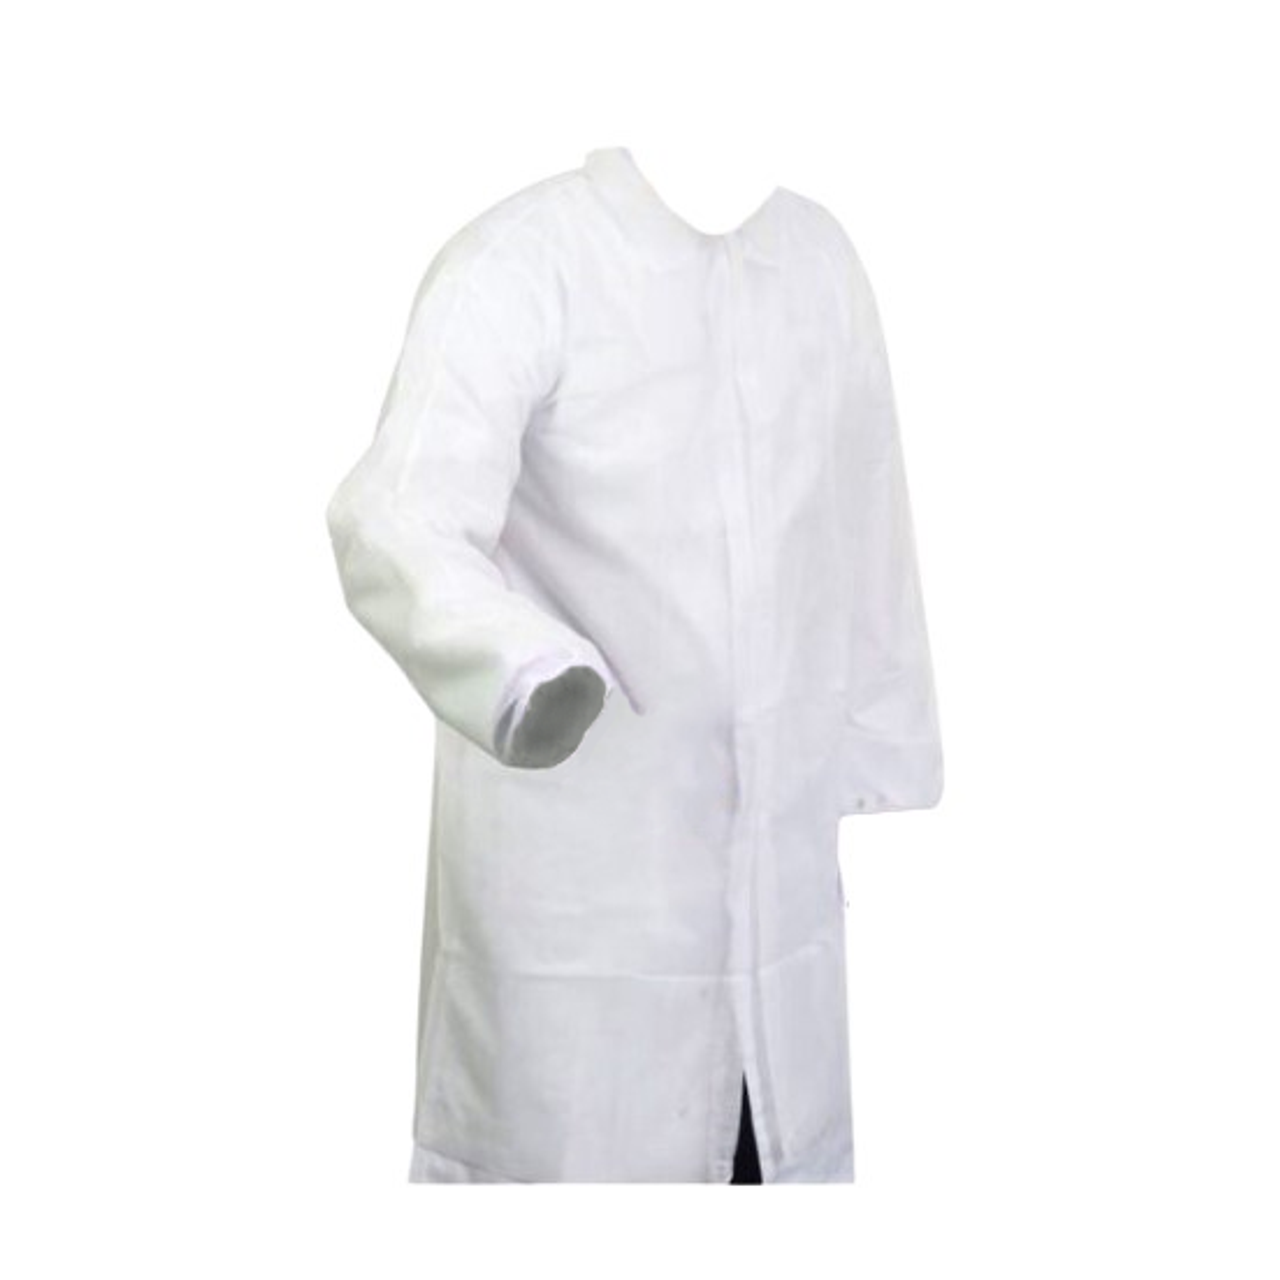 Supertouch  PP Non-Woven Disposable Visitor Coat,  White Size M - Qty 1